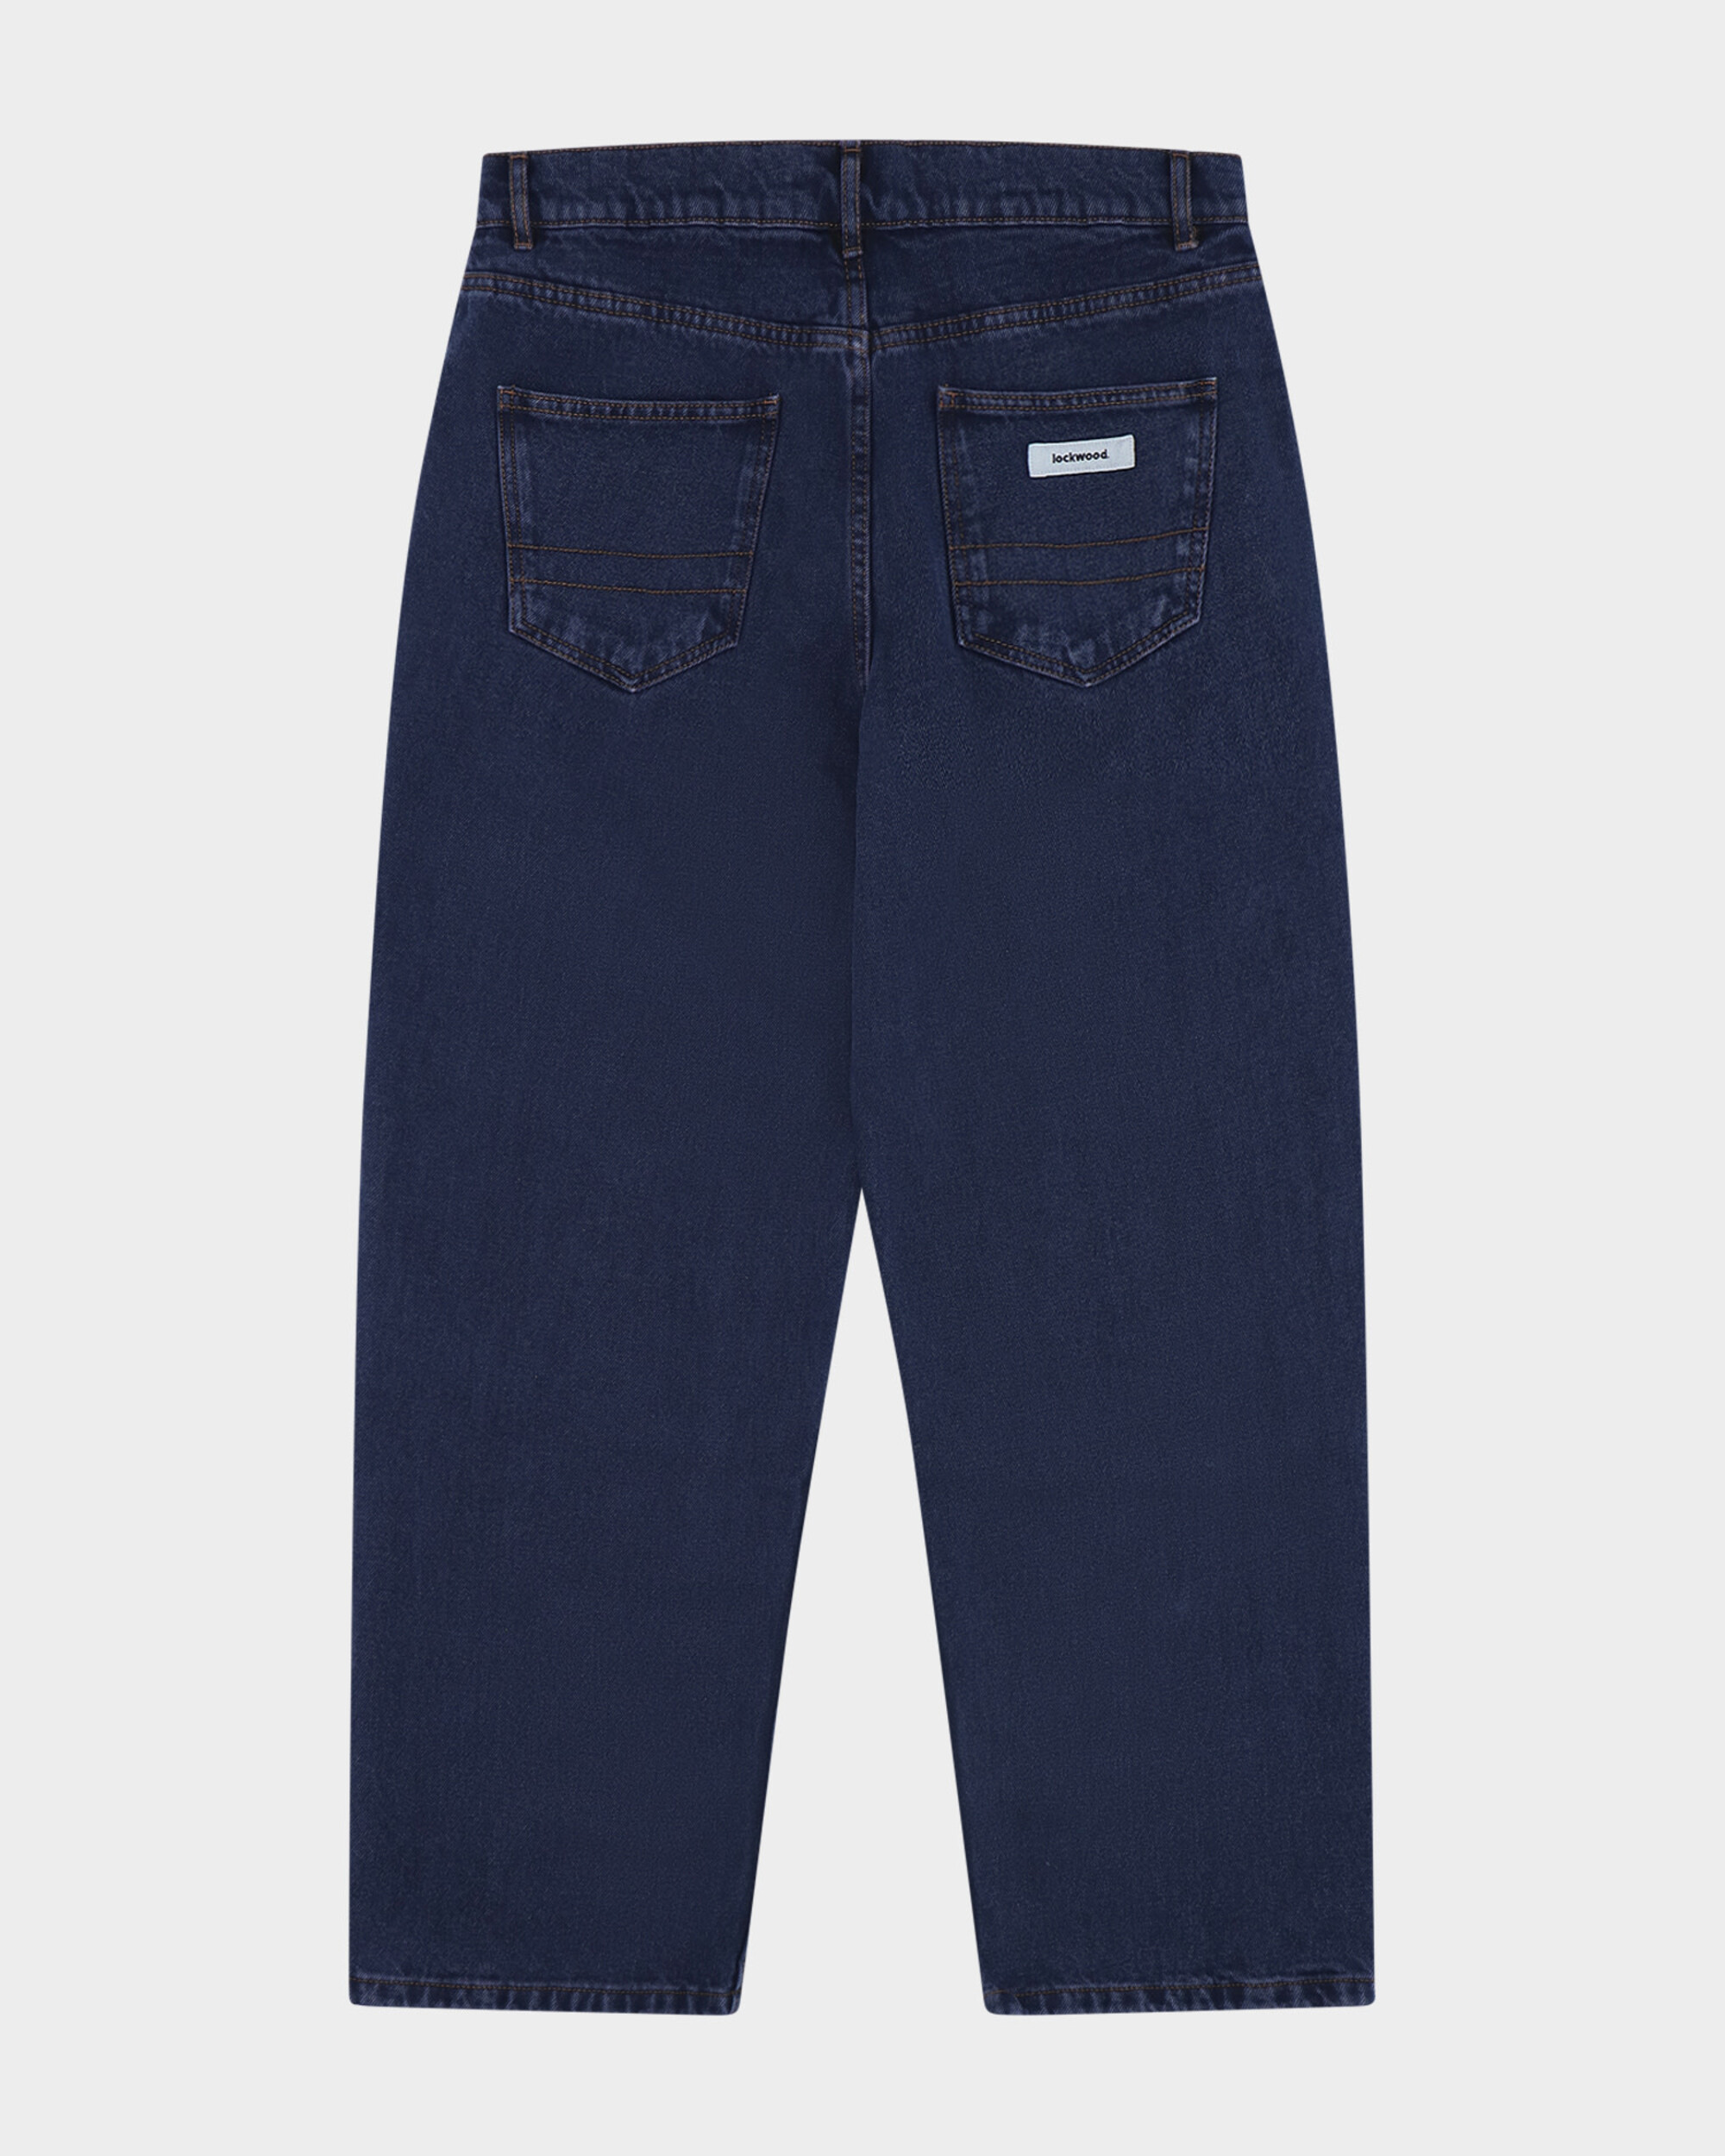 Lockwood Classic Relaxed Jeans - Galaxy Blue